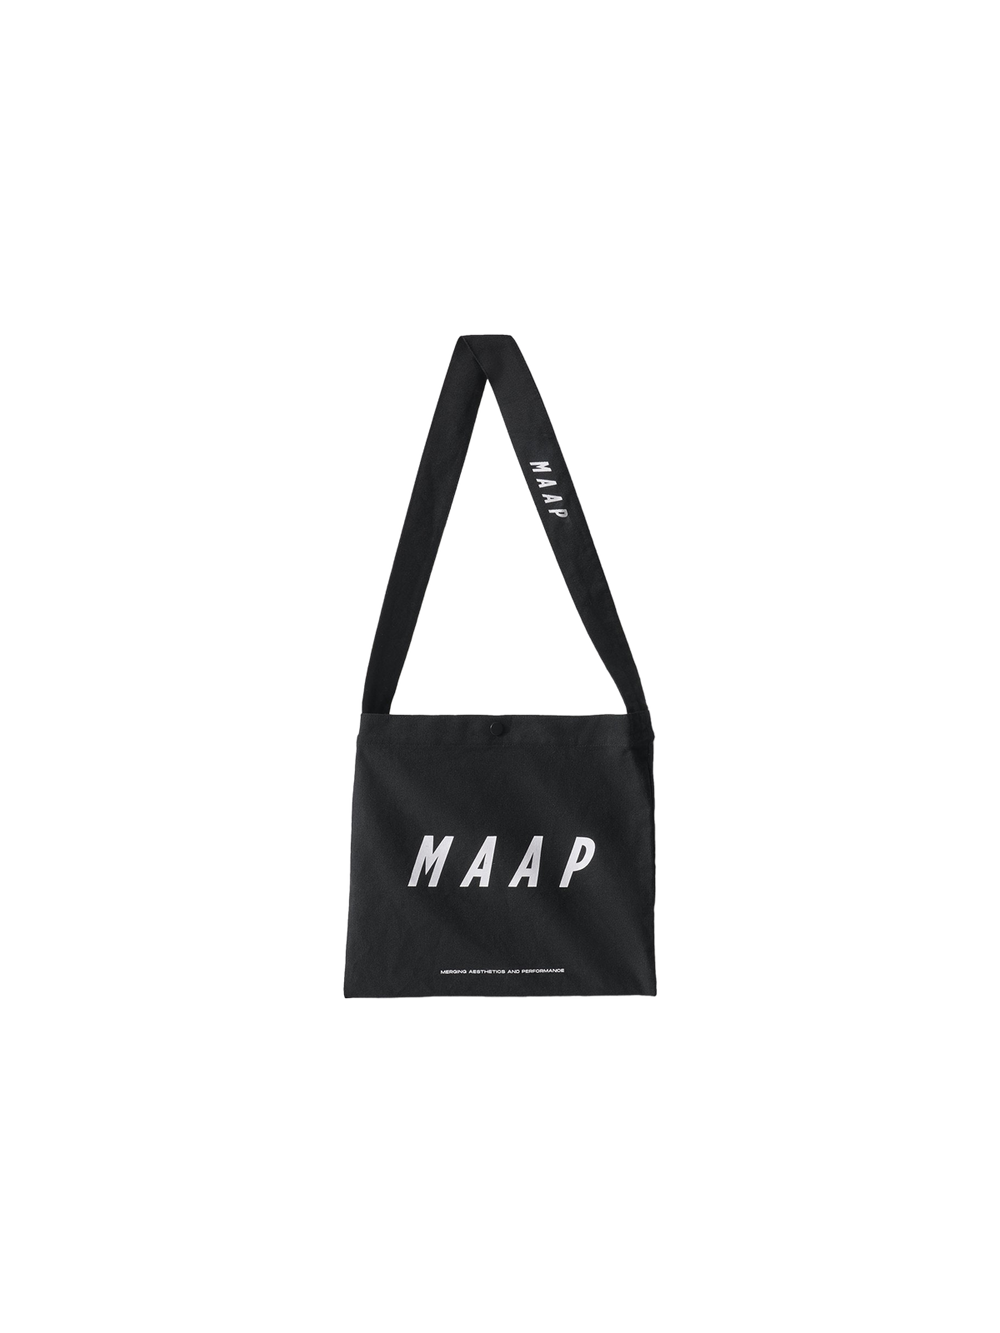 Product Image for MAAP Musette